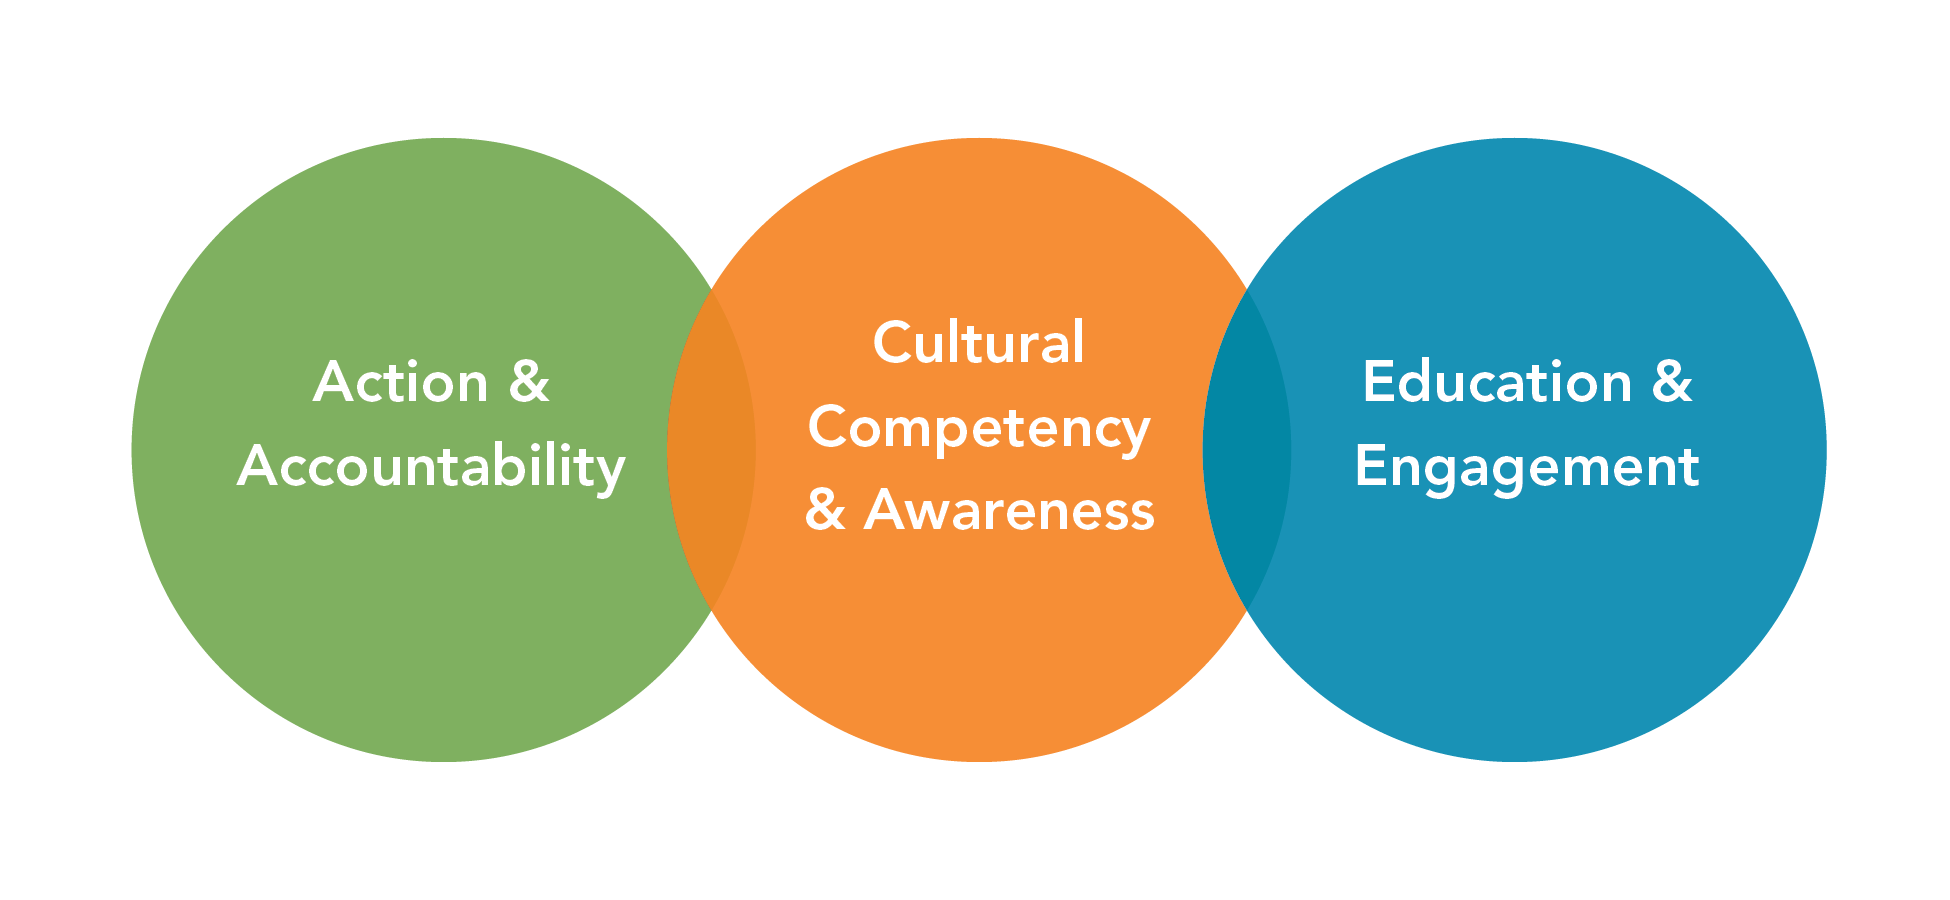 Three interlocking circles with "Action & Accountability; Cultural Competency & Awareness; and Education & Engagement" written inside them.